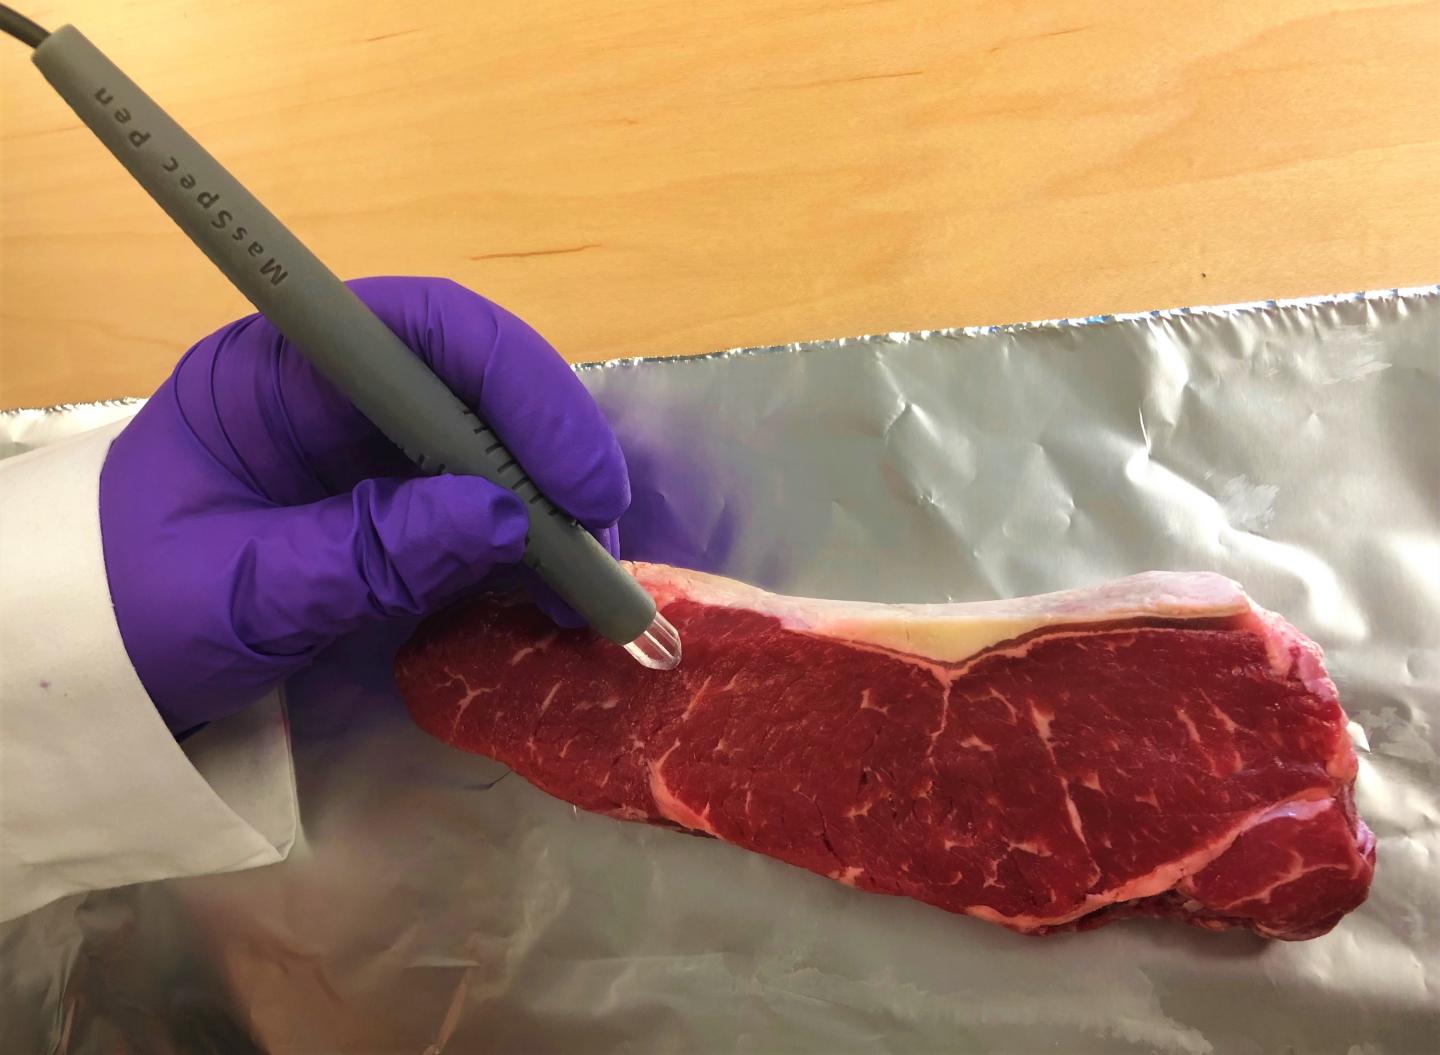 The MasSpec Pen can authenticate the type and purity of meat samples in as little as 15 seconds. Source: Adapted from Journal of Agricultural and Food Chemistry